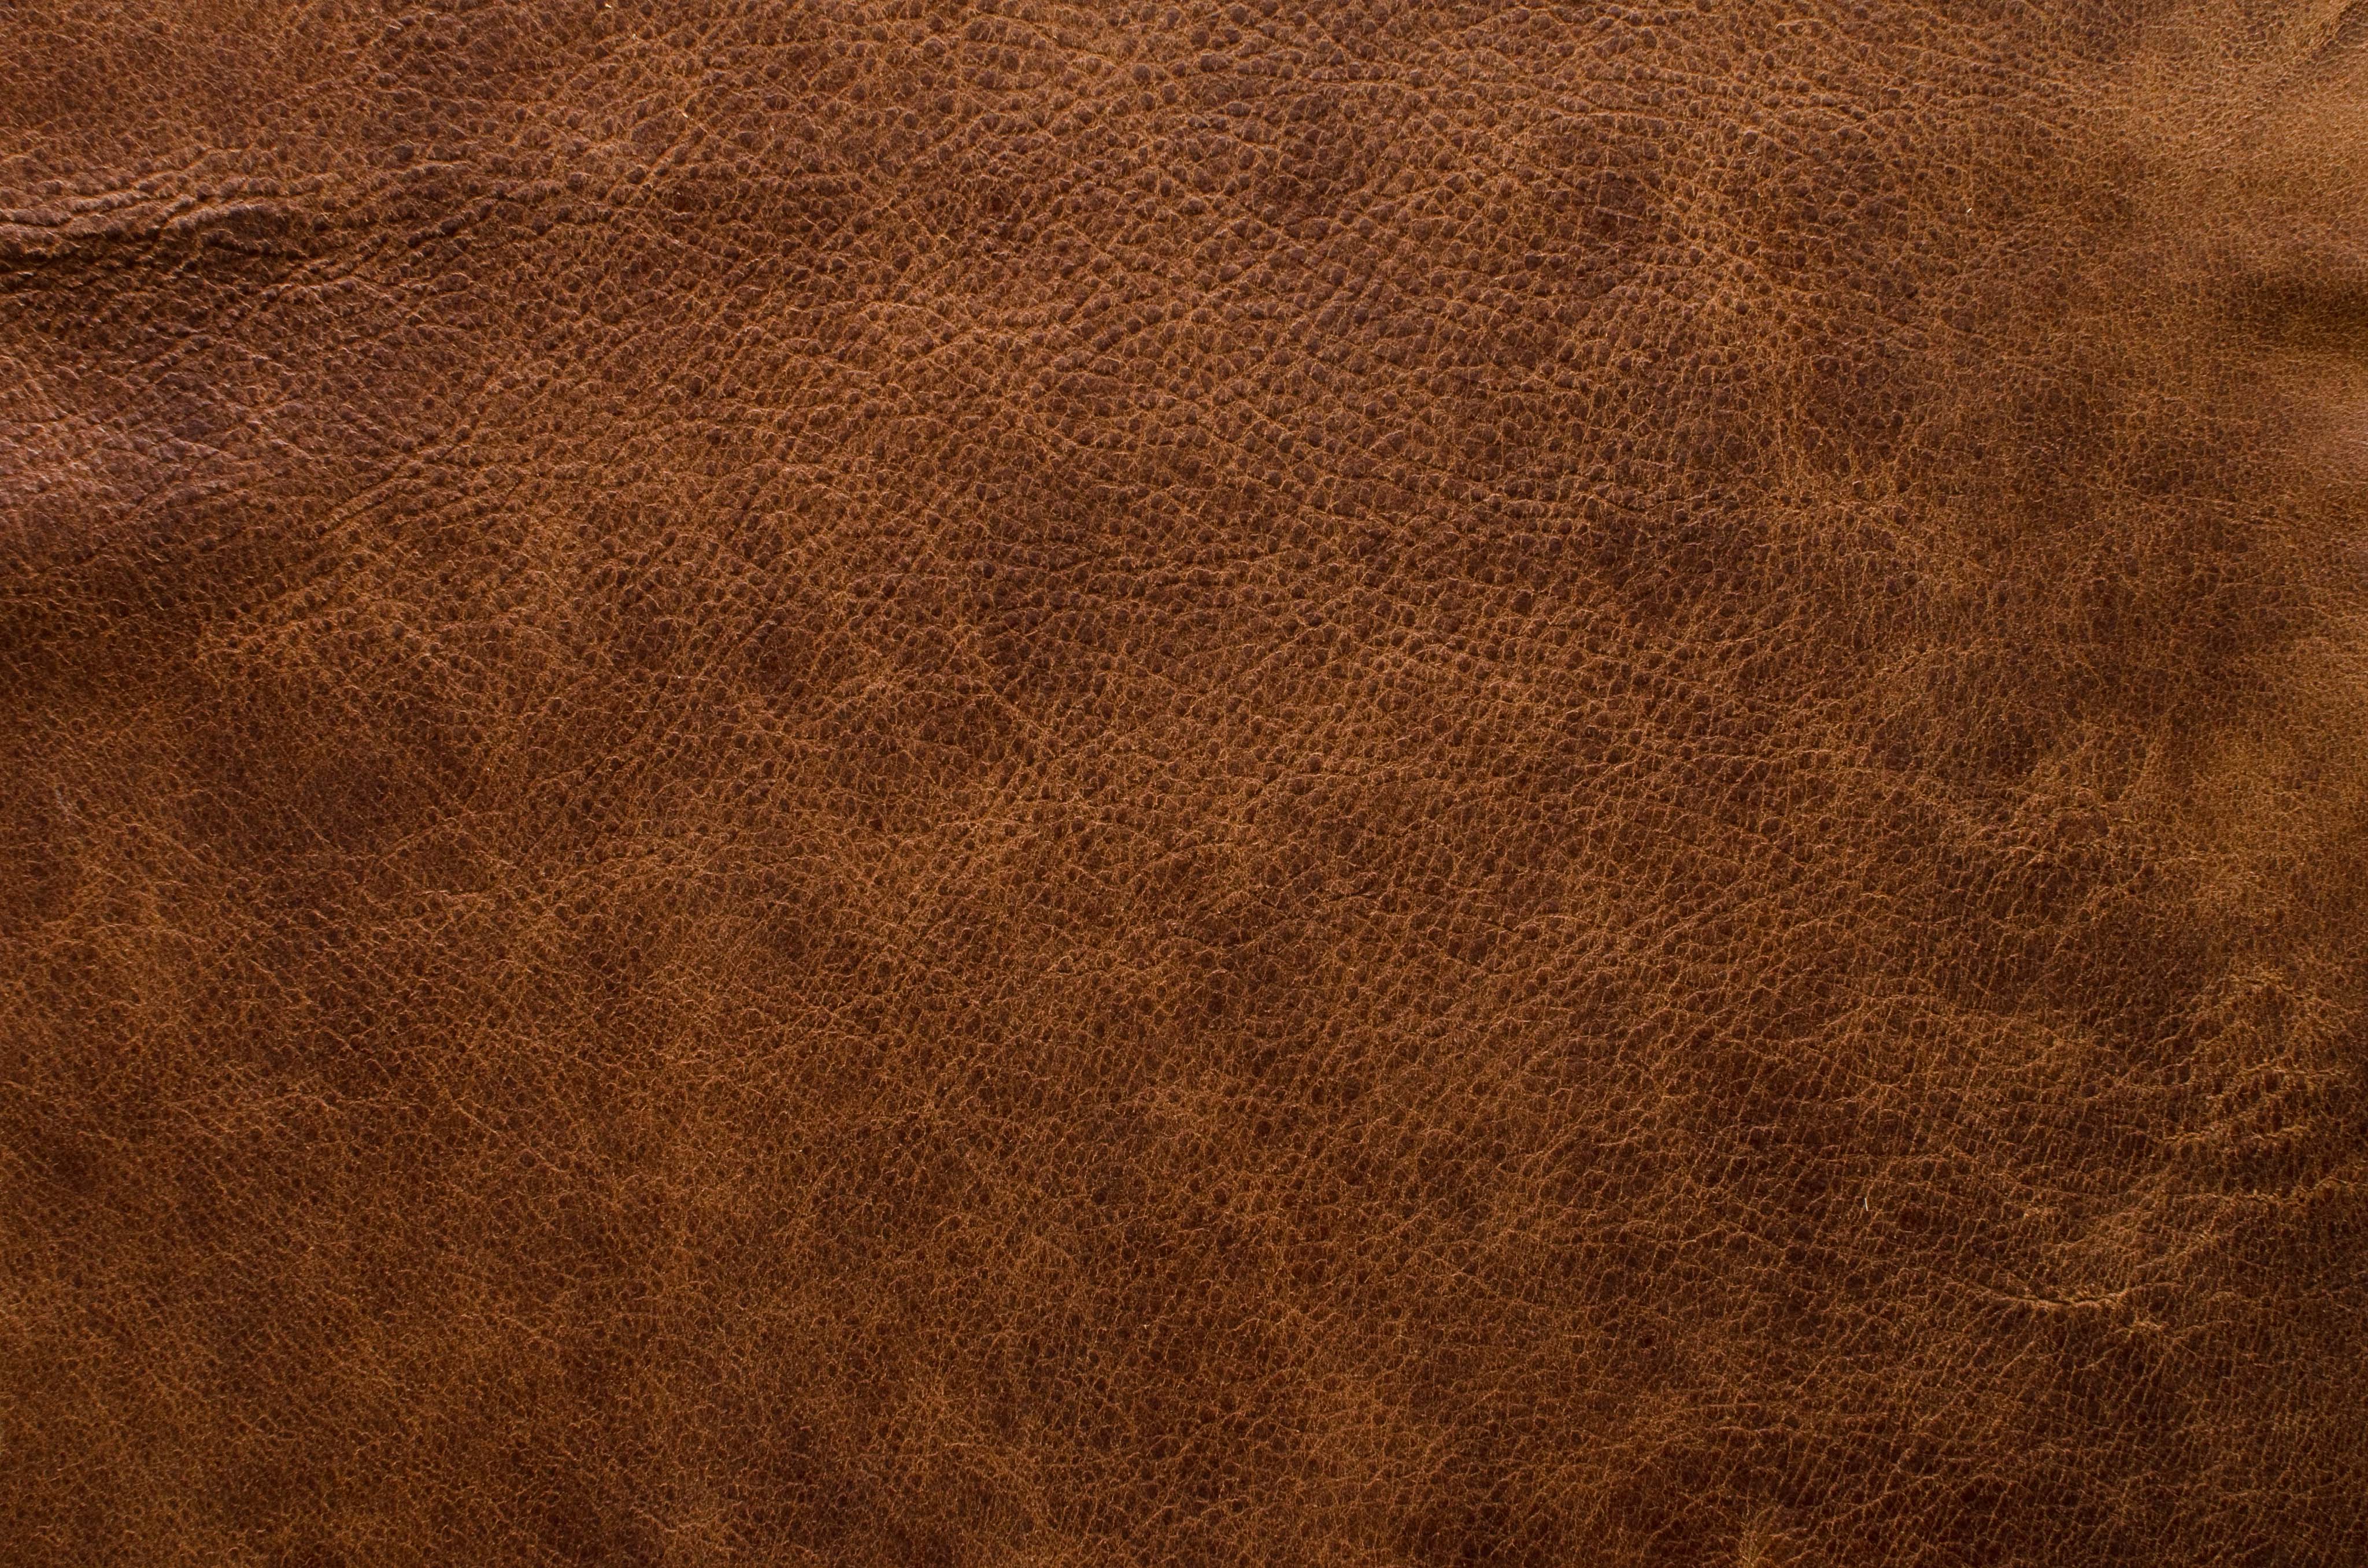 Free download Related image with Brown Leather Texture [4096x2713] for